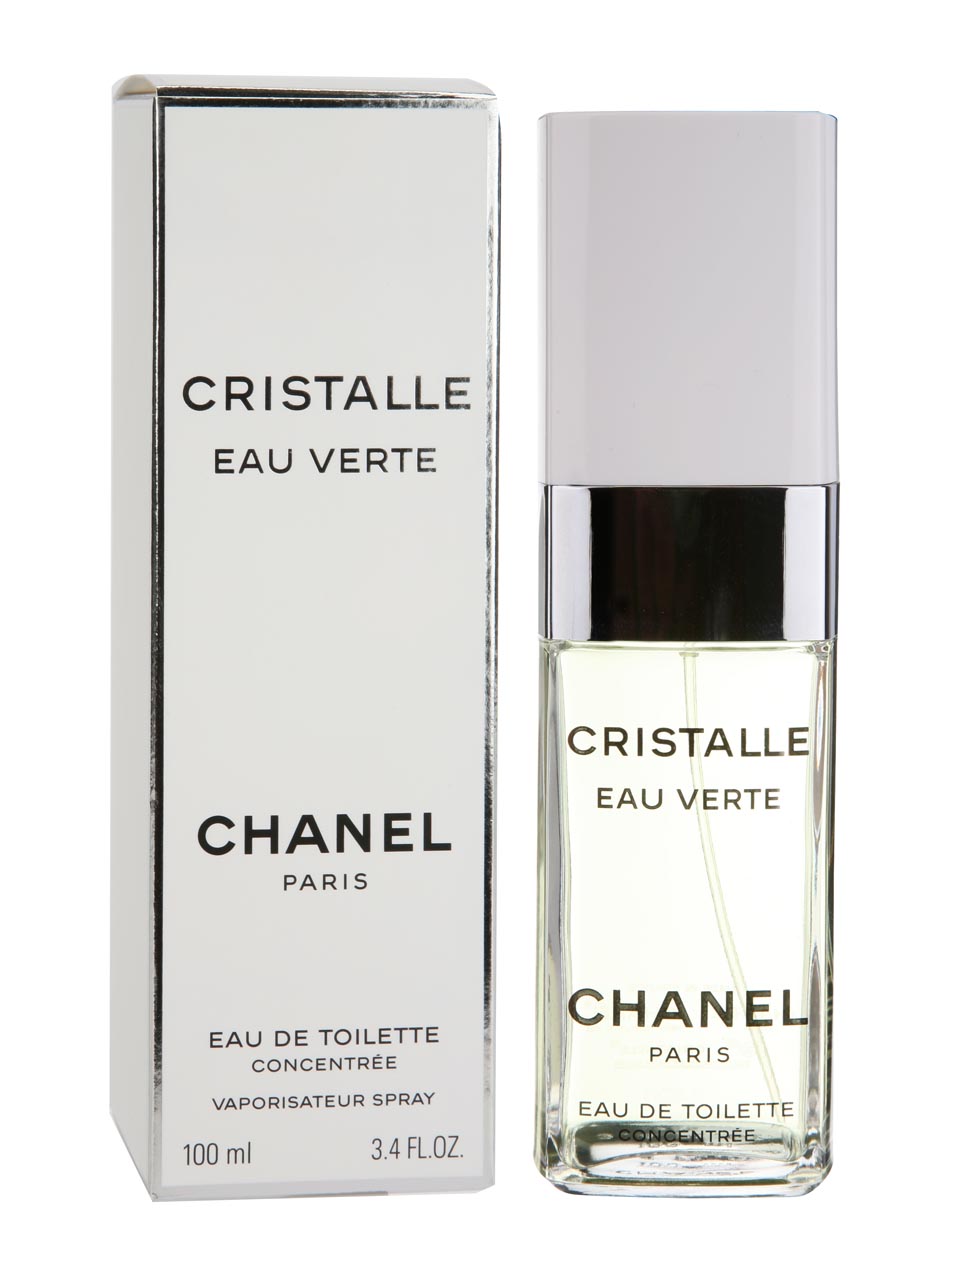 CHANEL Cristalle Eau Verte Perfume Review - Discontinued - Major Fragrance  Shortage Wave is Coming 